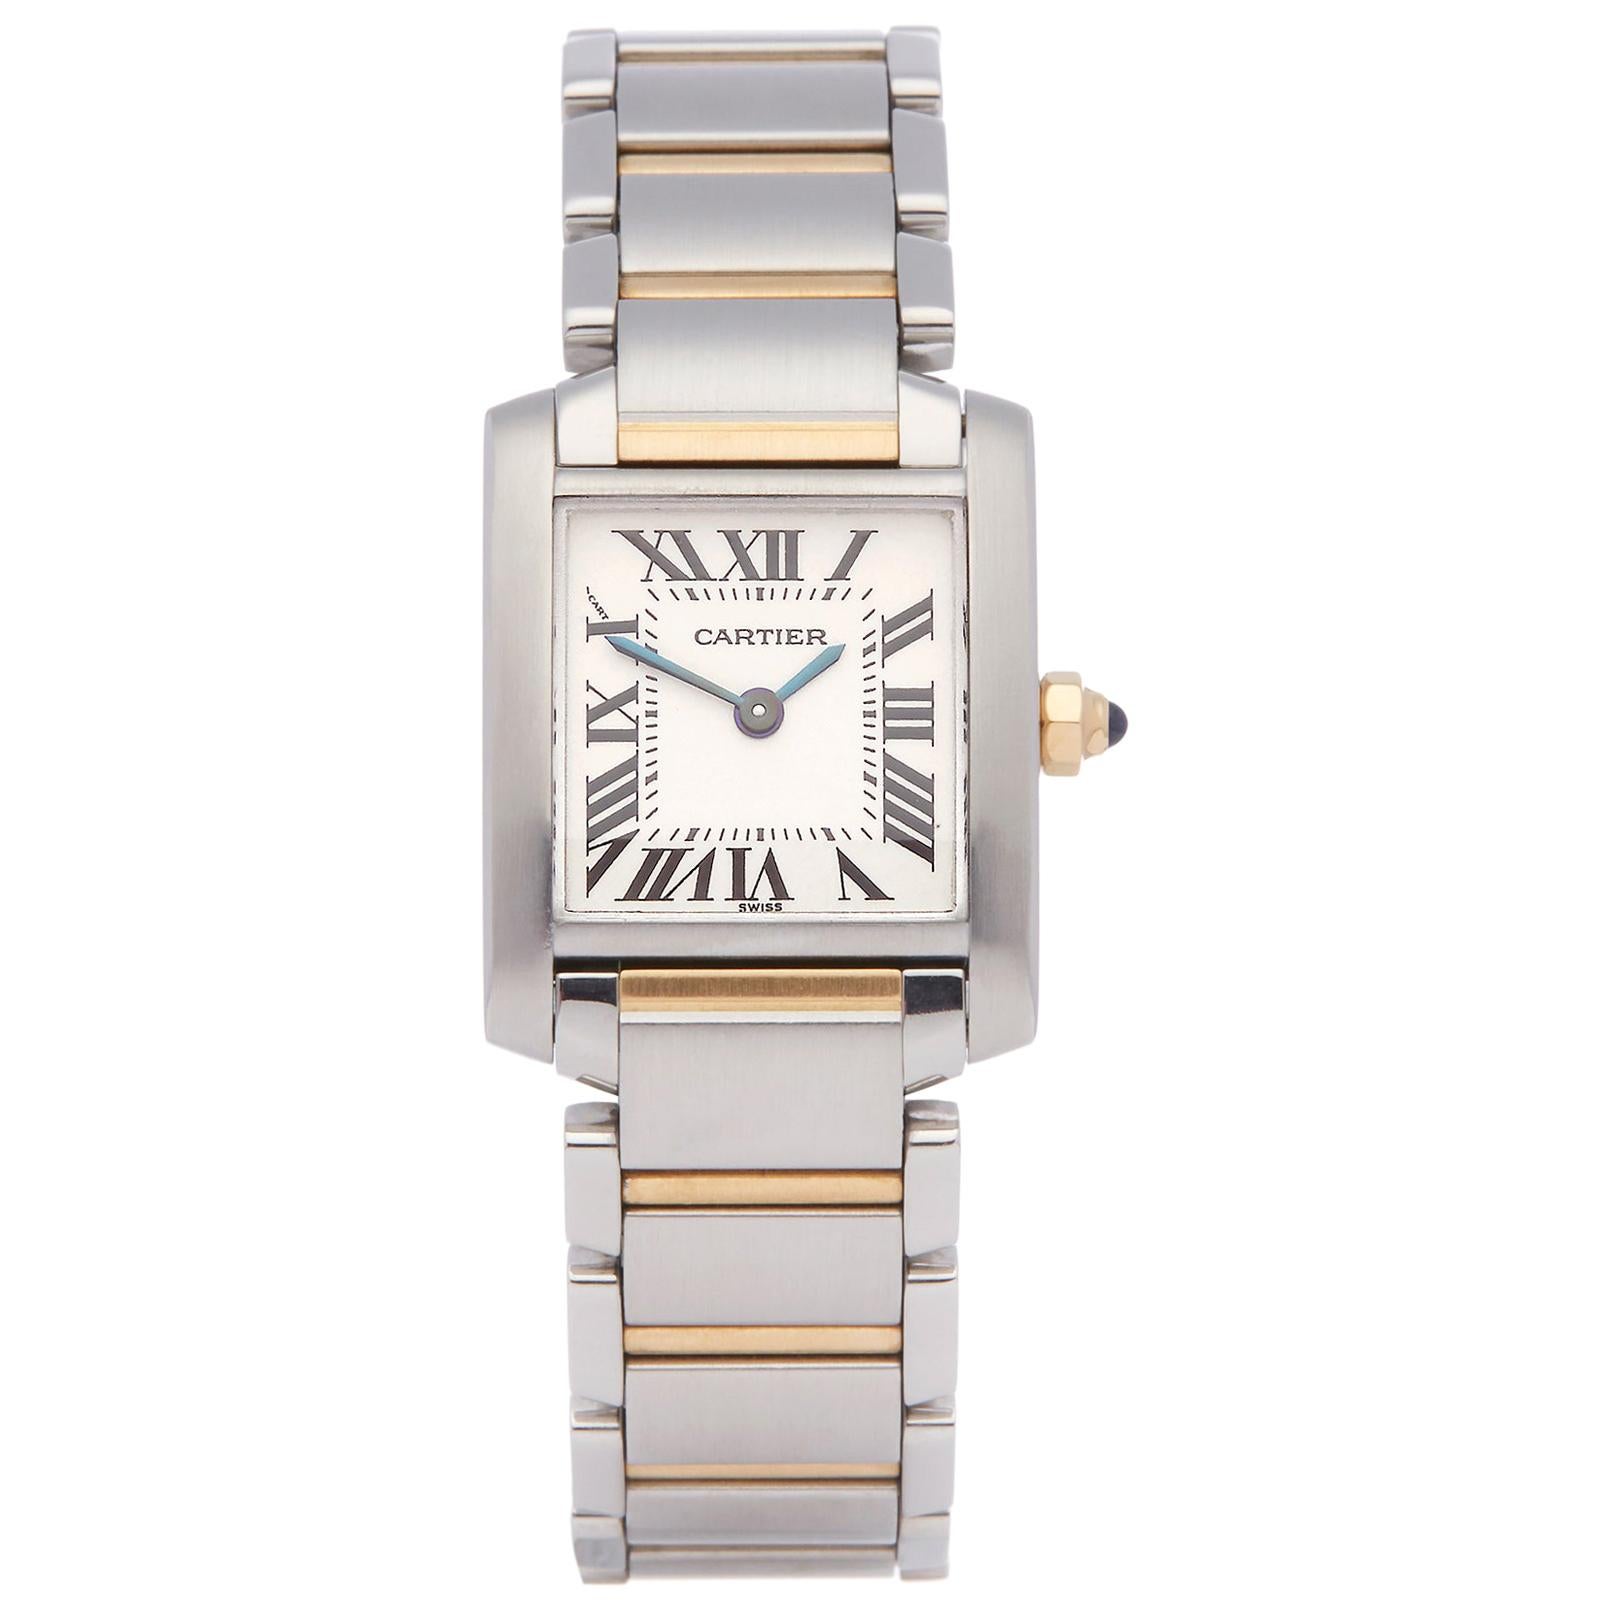 Cartier Tank Francaise Stainless Steel and Yellow Gold 2384